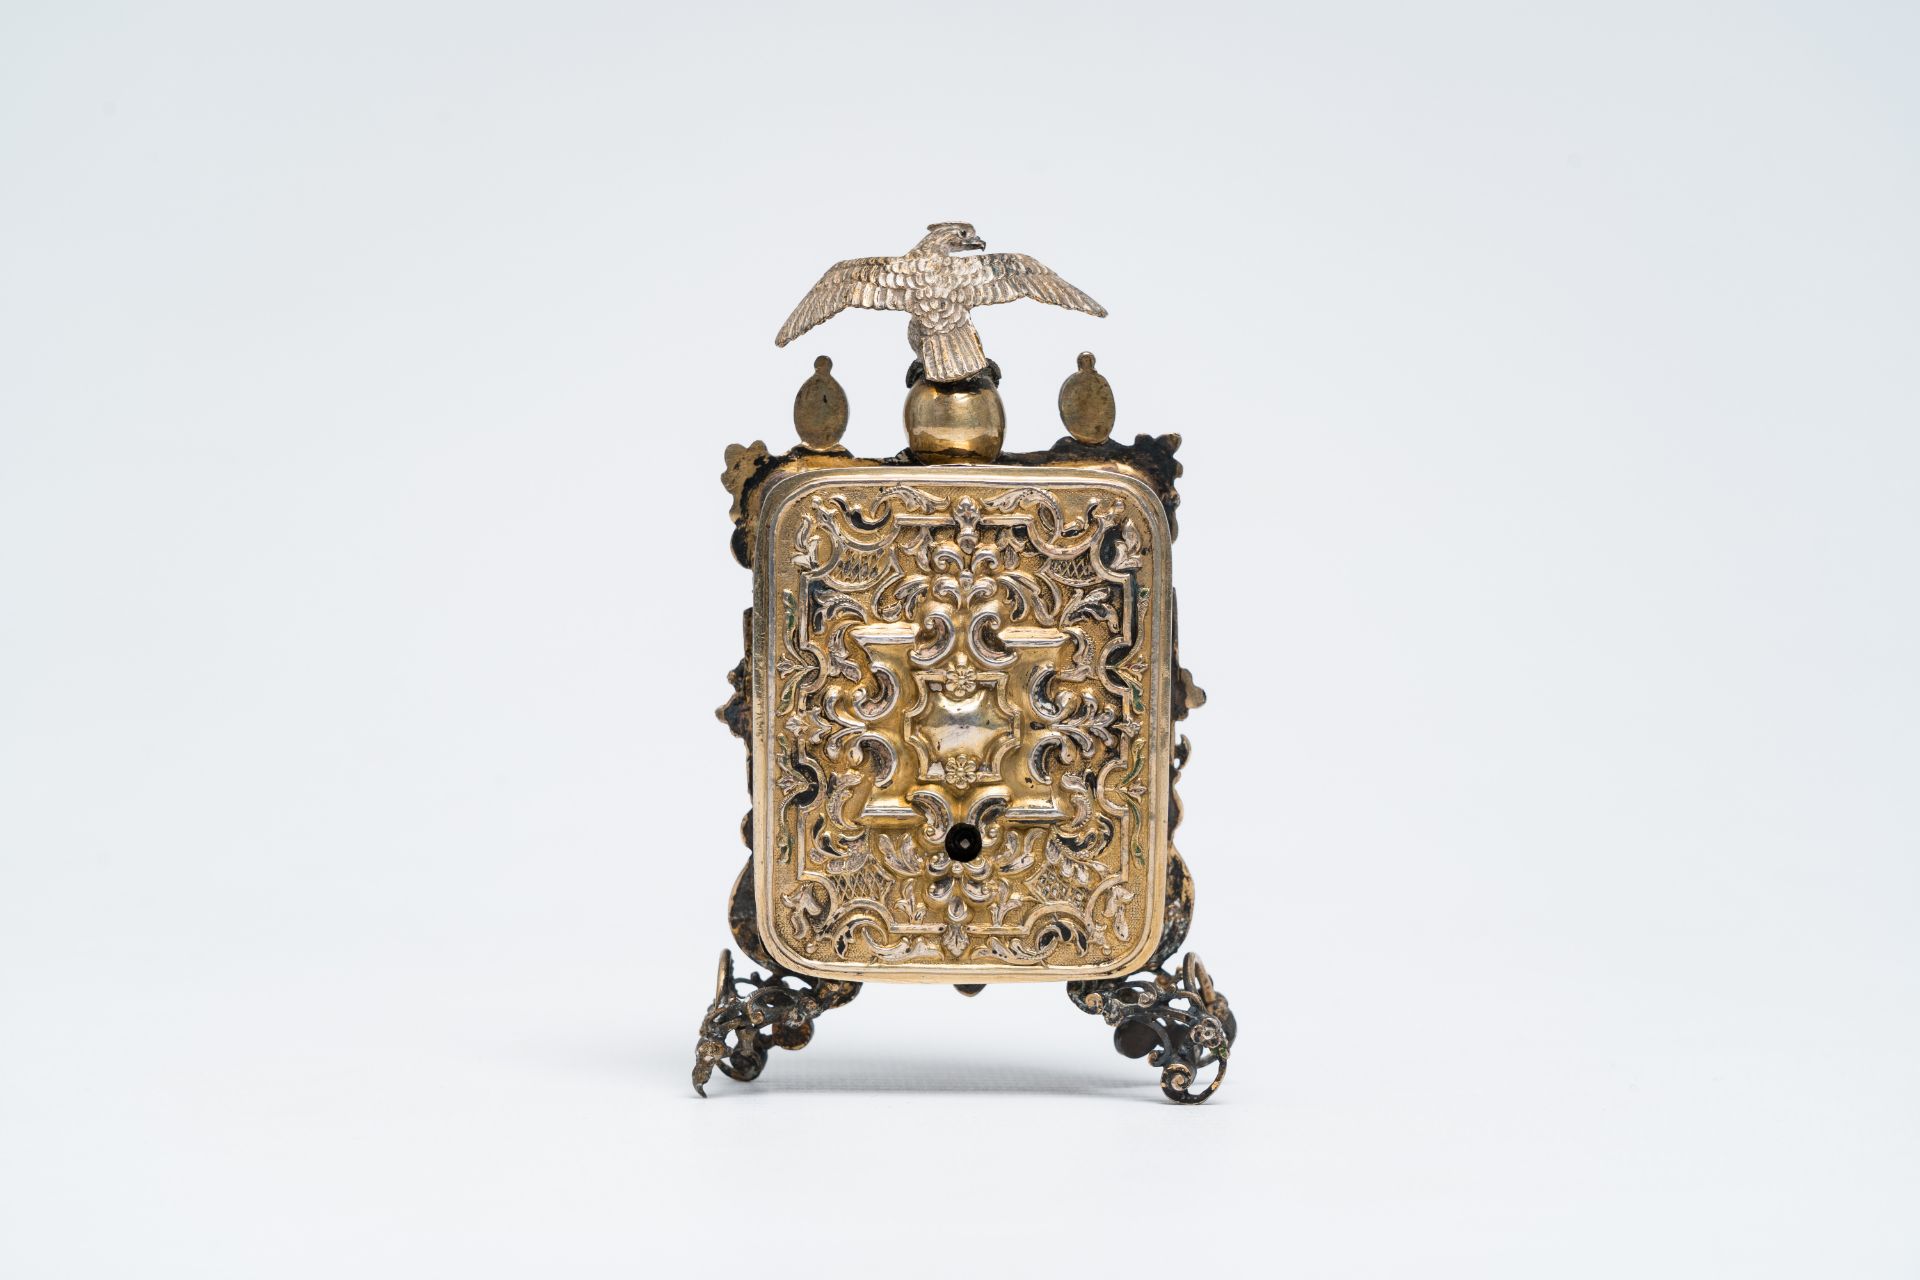 A gilt silver Baroque revival Viennese table clock crowned with an eagle and inlaid with turquoise, - Image 4 of 11